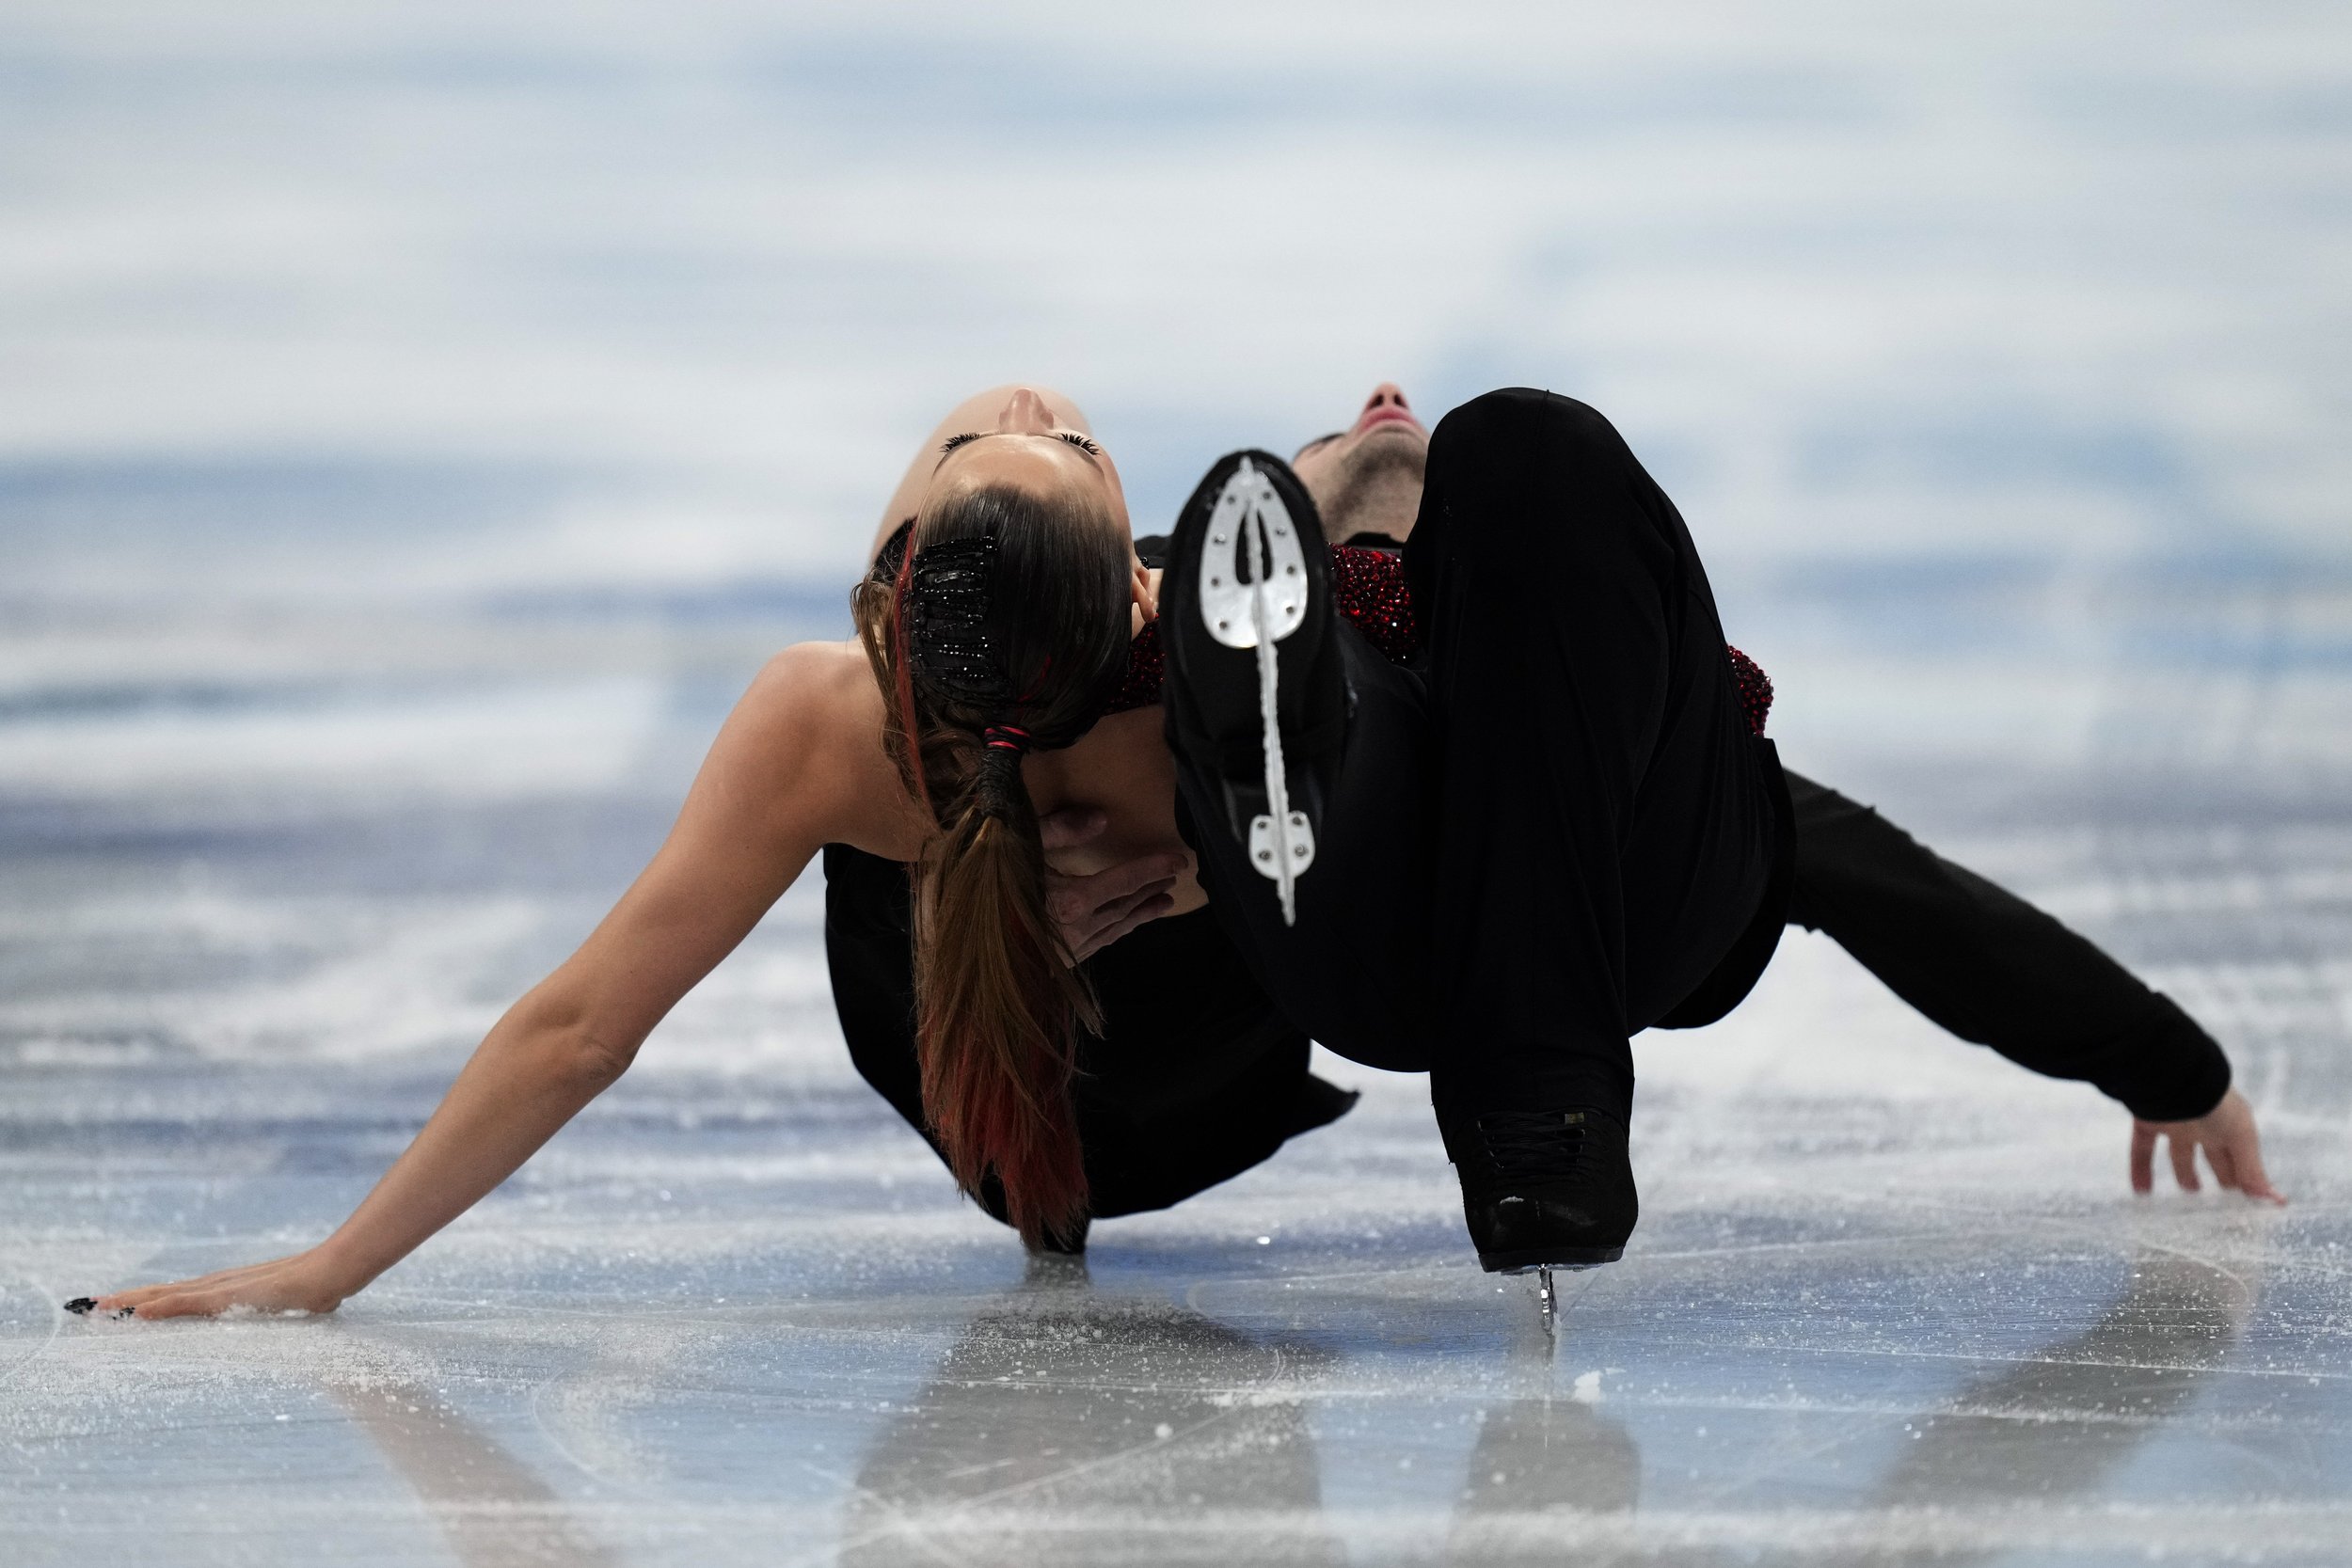  Oleksandra Nazarova and Maksym Nikitin, of Ukraine, perform their routine in the ice dance competition during the figure skating at the 2022 Winter Olympics, Monday, Feb. 14, 2022, in Beijing. (AP Photo/Bernat Armangue) 